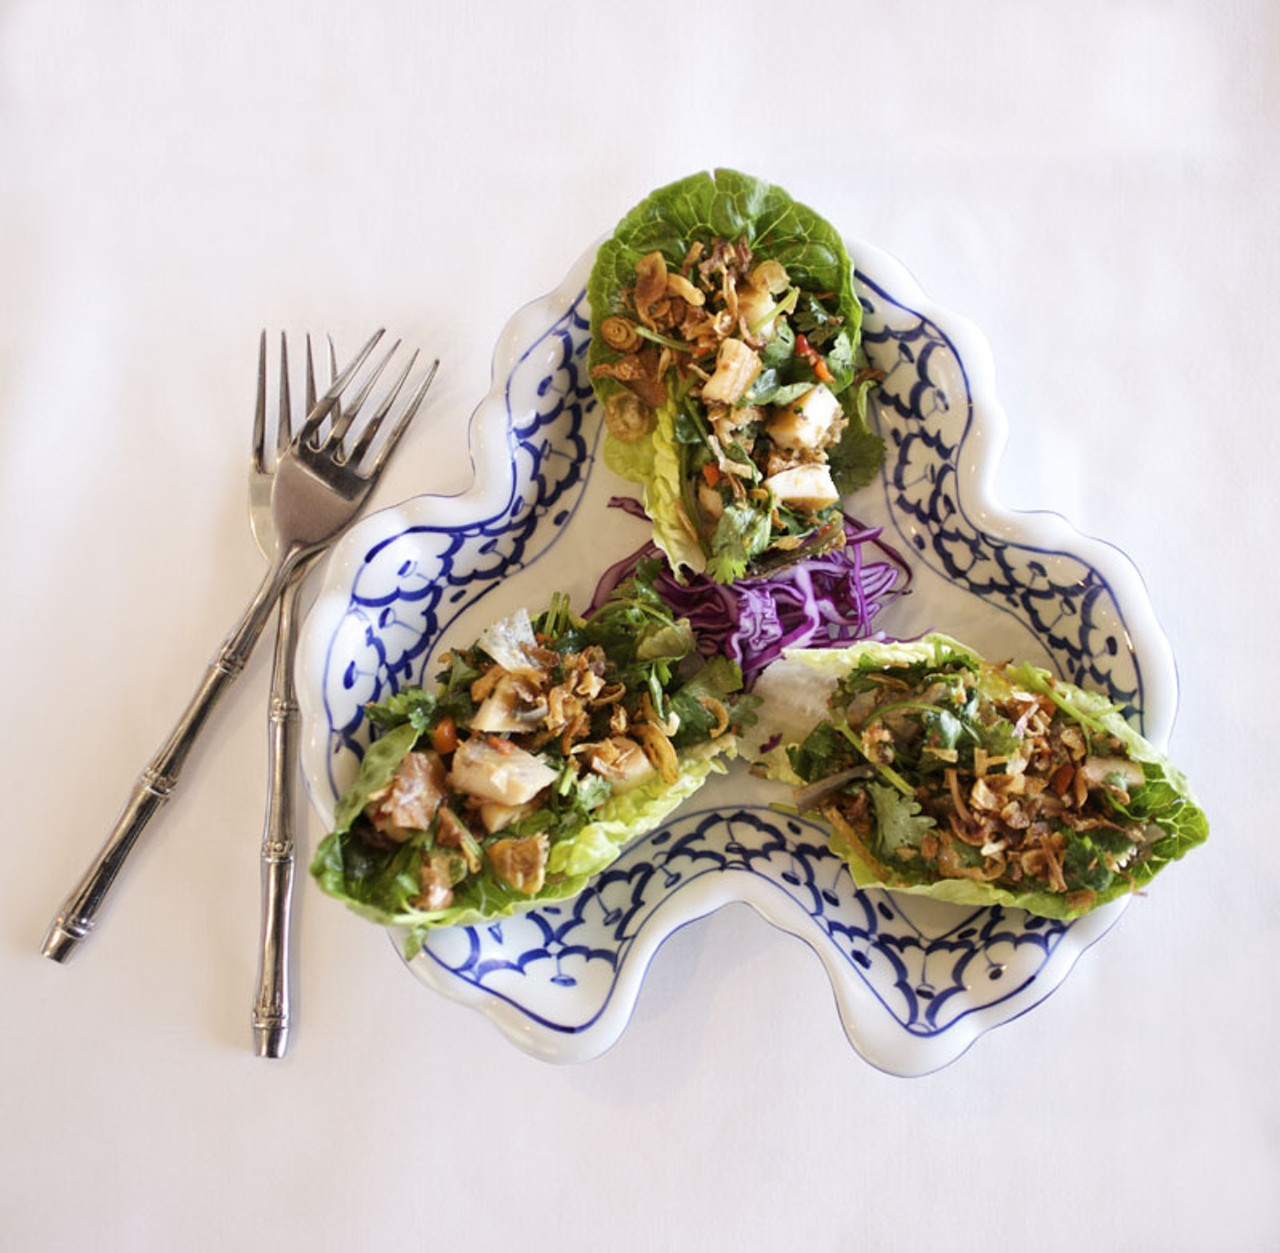 Miang of Smoked Trout is a "small snack" of flakes of smoked trout, cilanro, shallots and Southeast Asian herbs mixed with a Tai chutney on Bibb leaf lettuce.